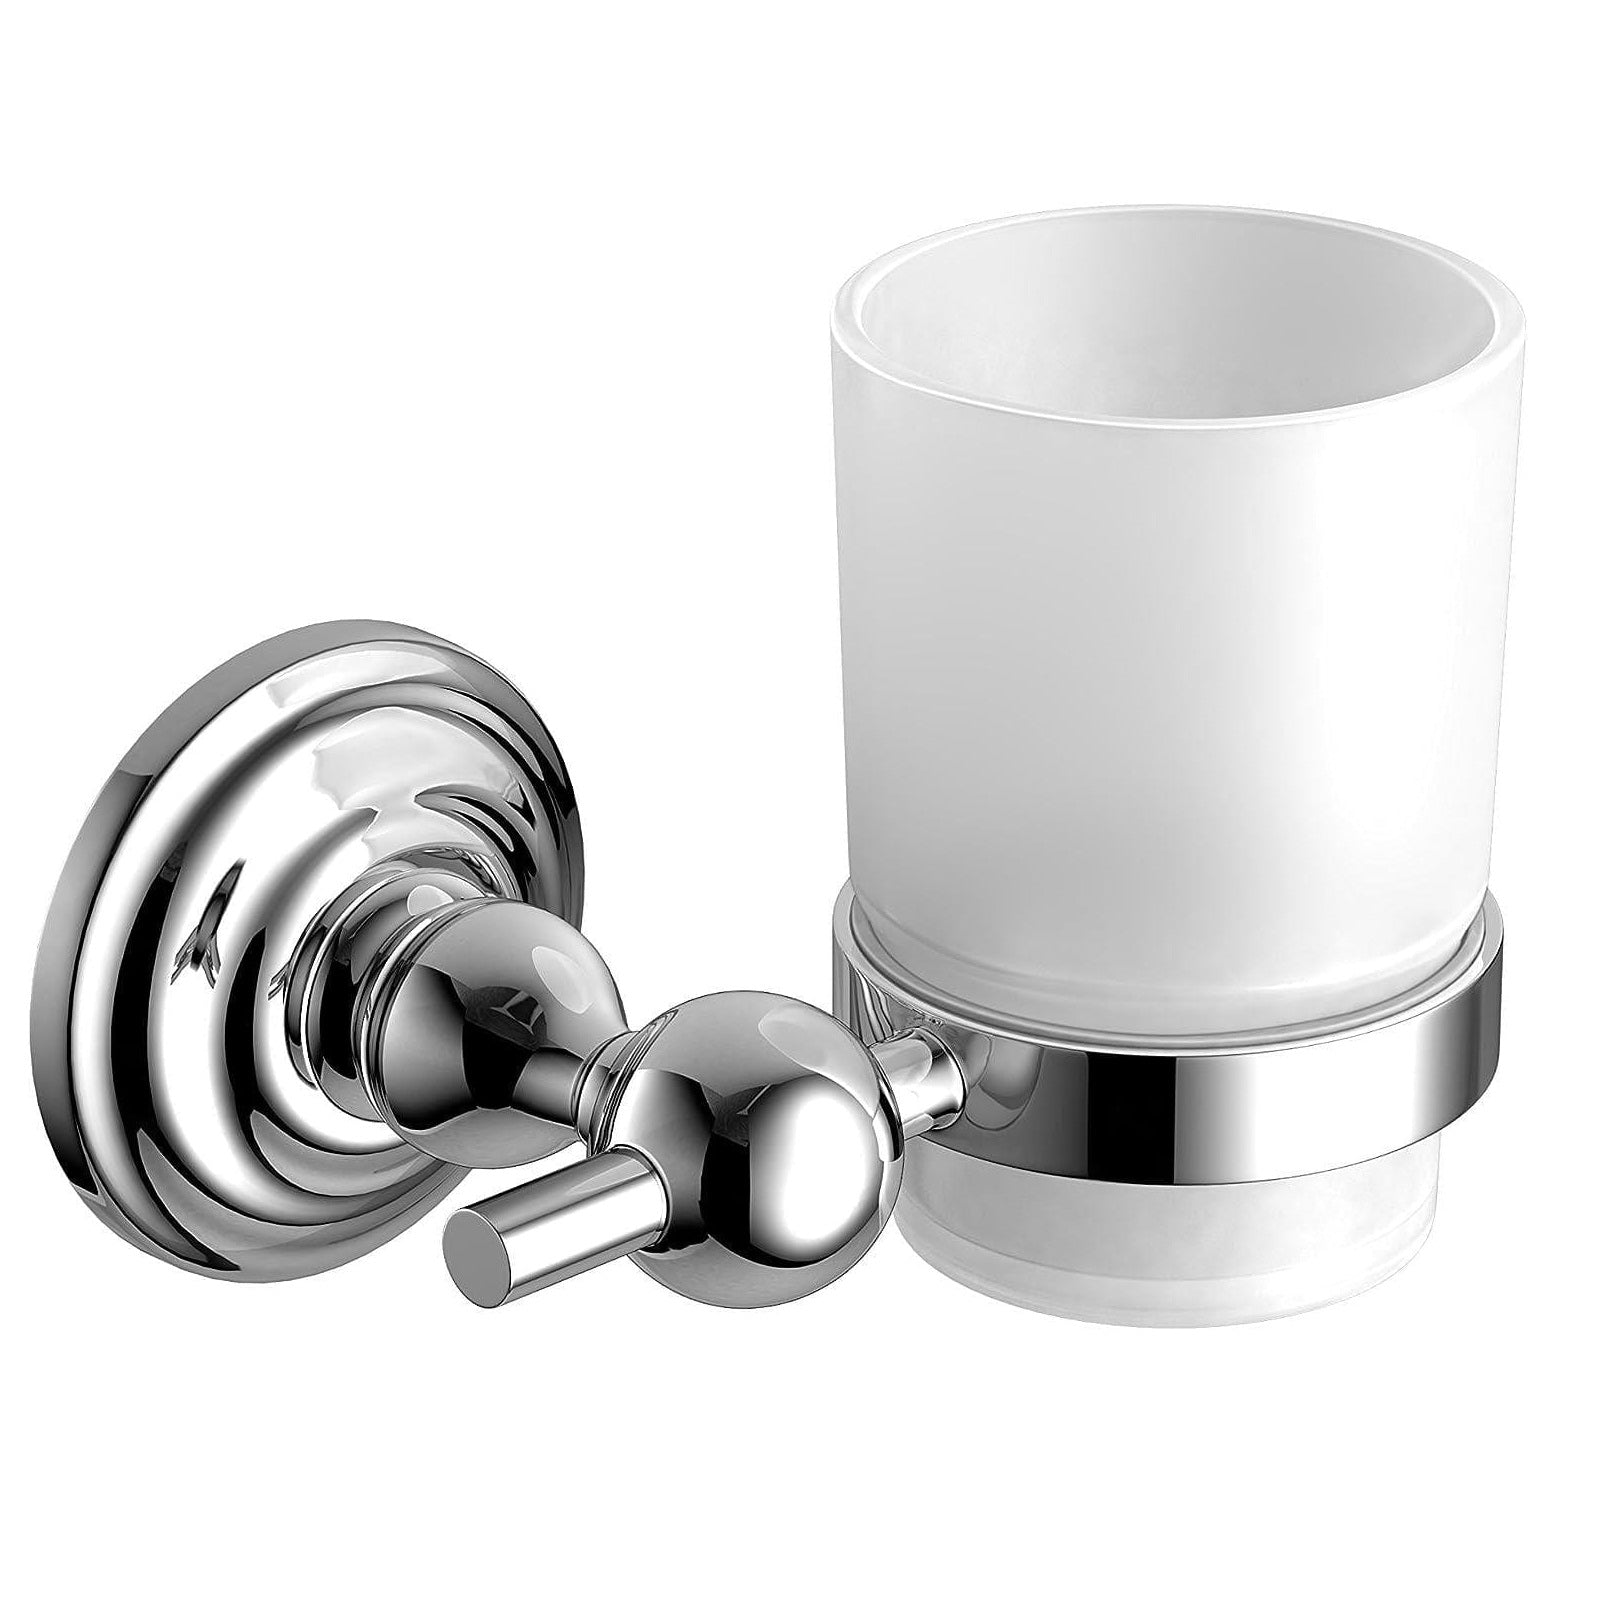 Traditional Wall Mounted Toothbrush Tumbler Holder - Chrome